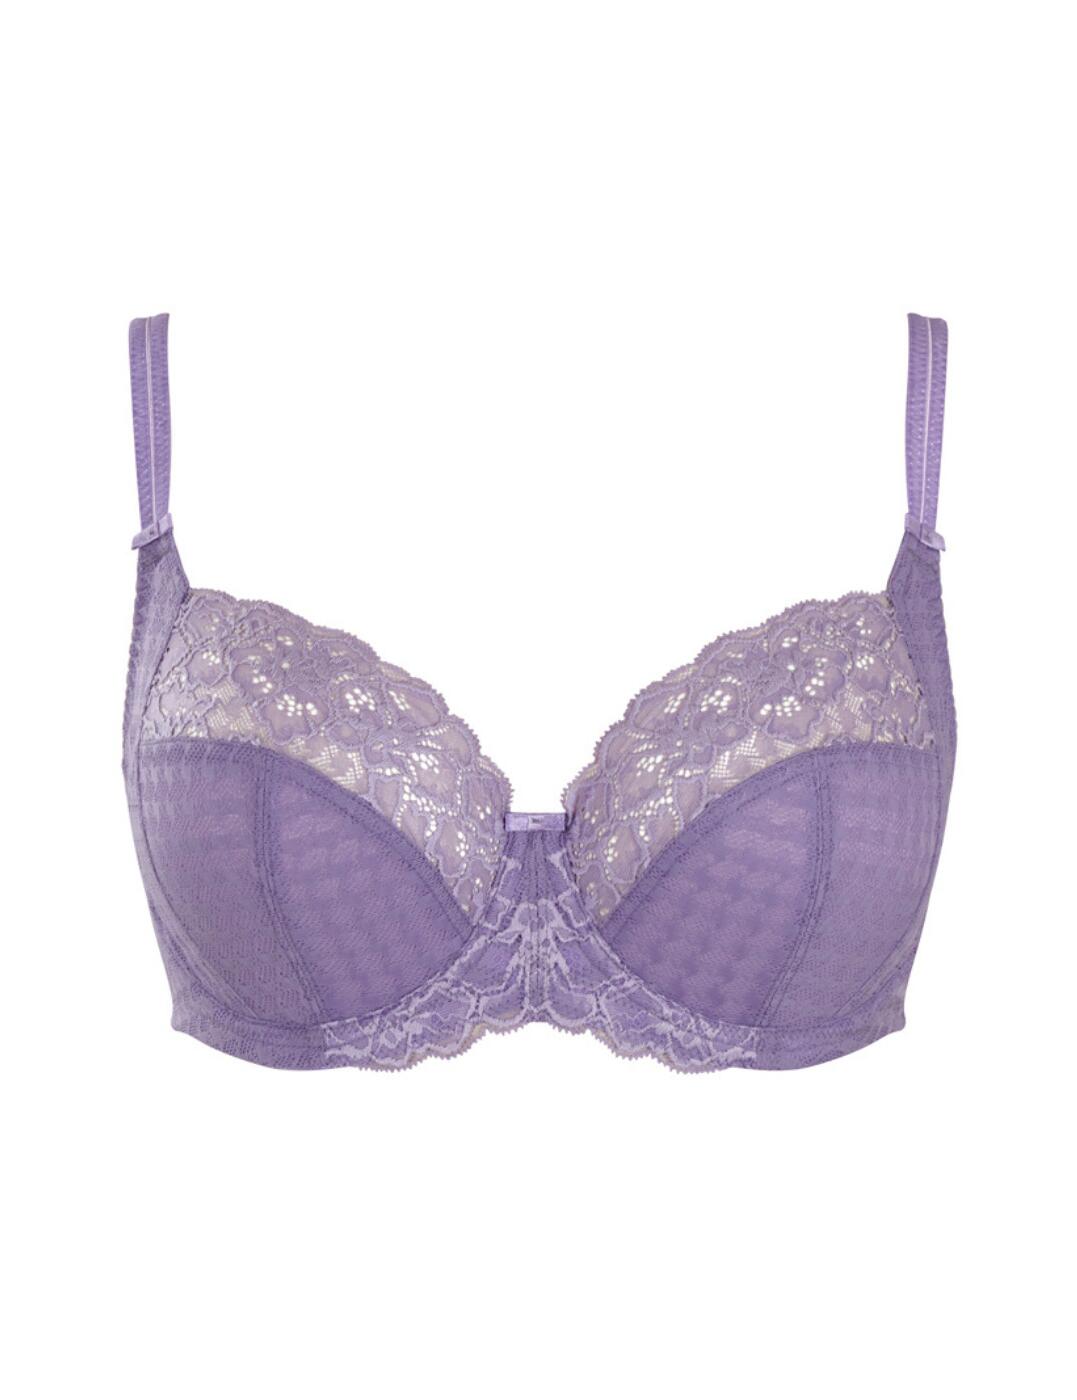 Buy DD-GG White Recycled Lace Comfort Full Cup Bra 34GG | Bras | Argos